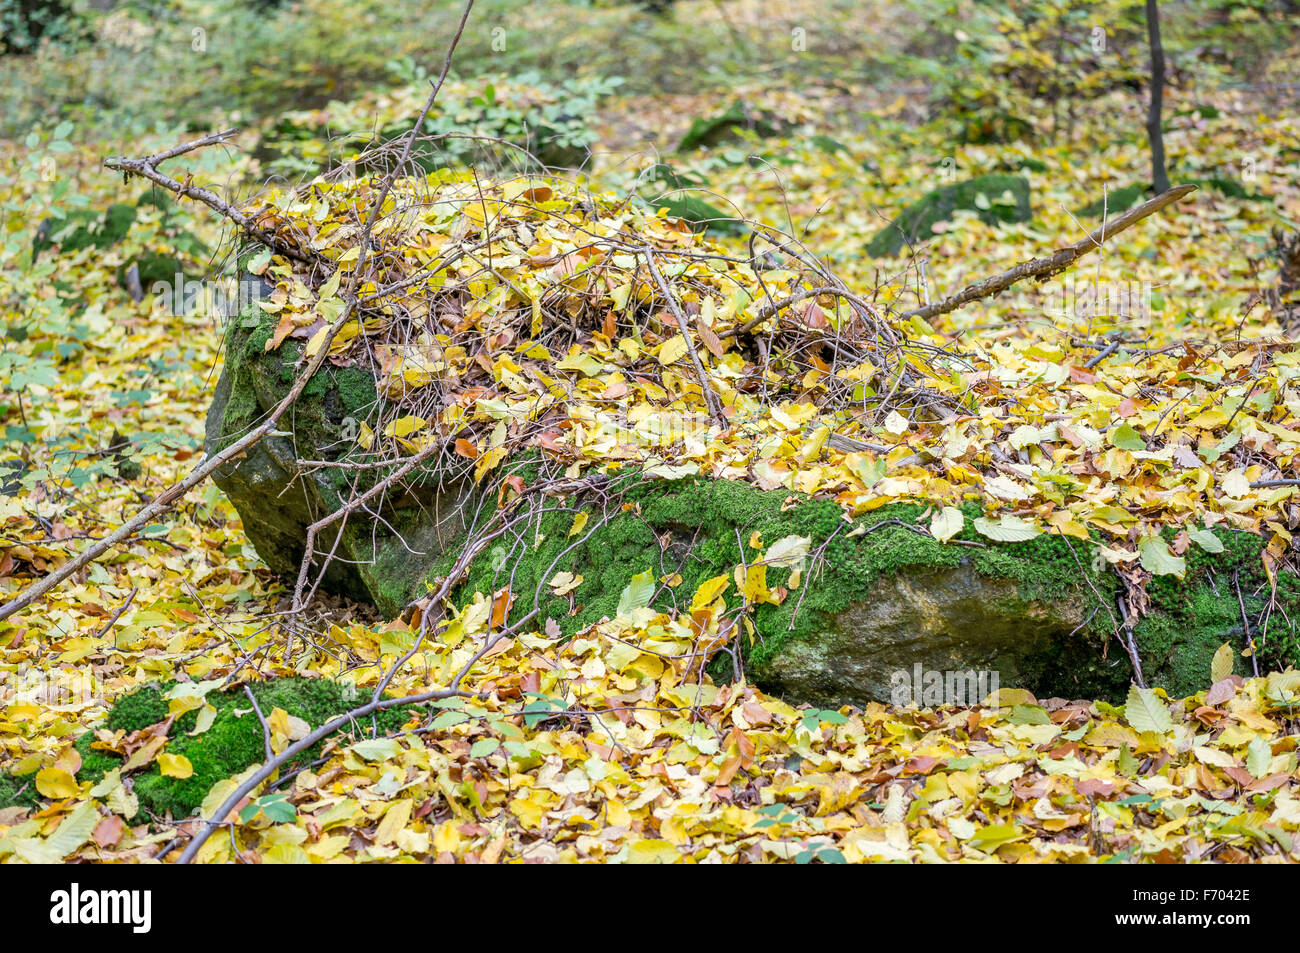 Mossy boulder covered with fallen autumn leaves Stock Photo